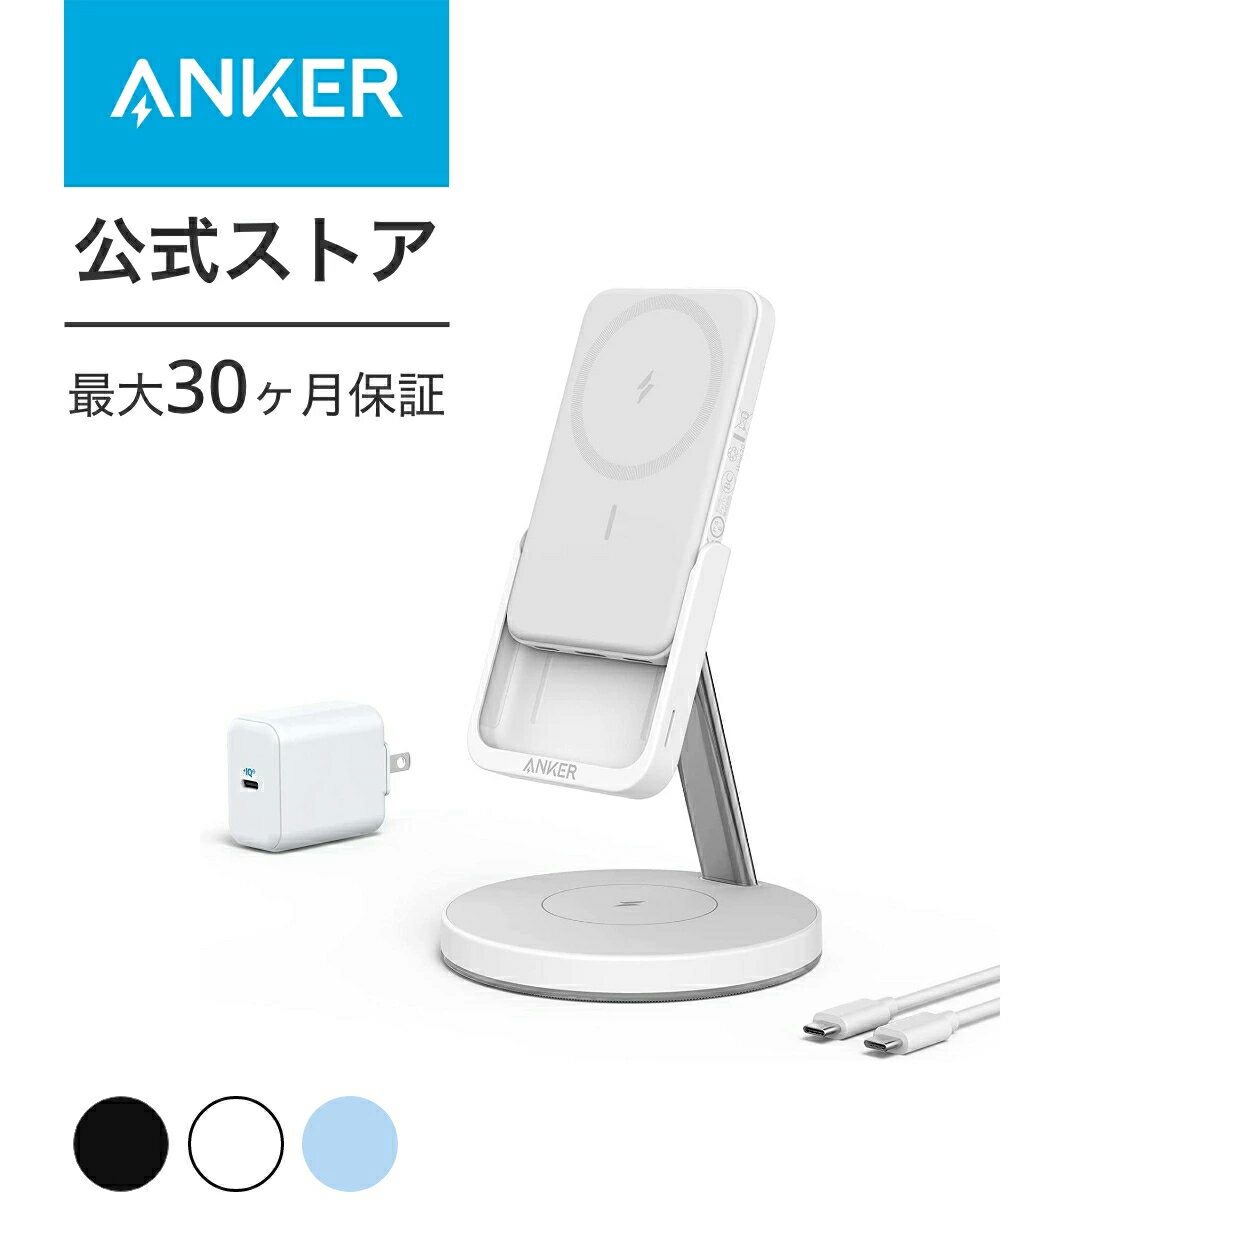 Anker 633 Magnetic Wireless Charger (MagGo)(マグネット式 2-in-1 ワイヤレス充電ステーション)